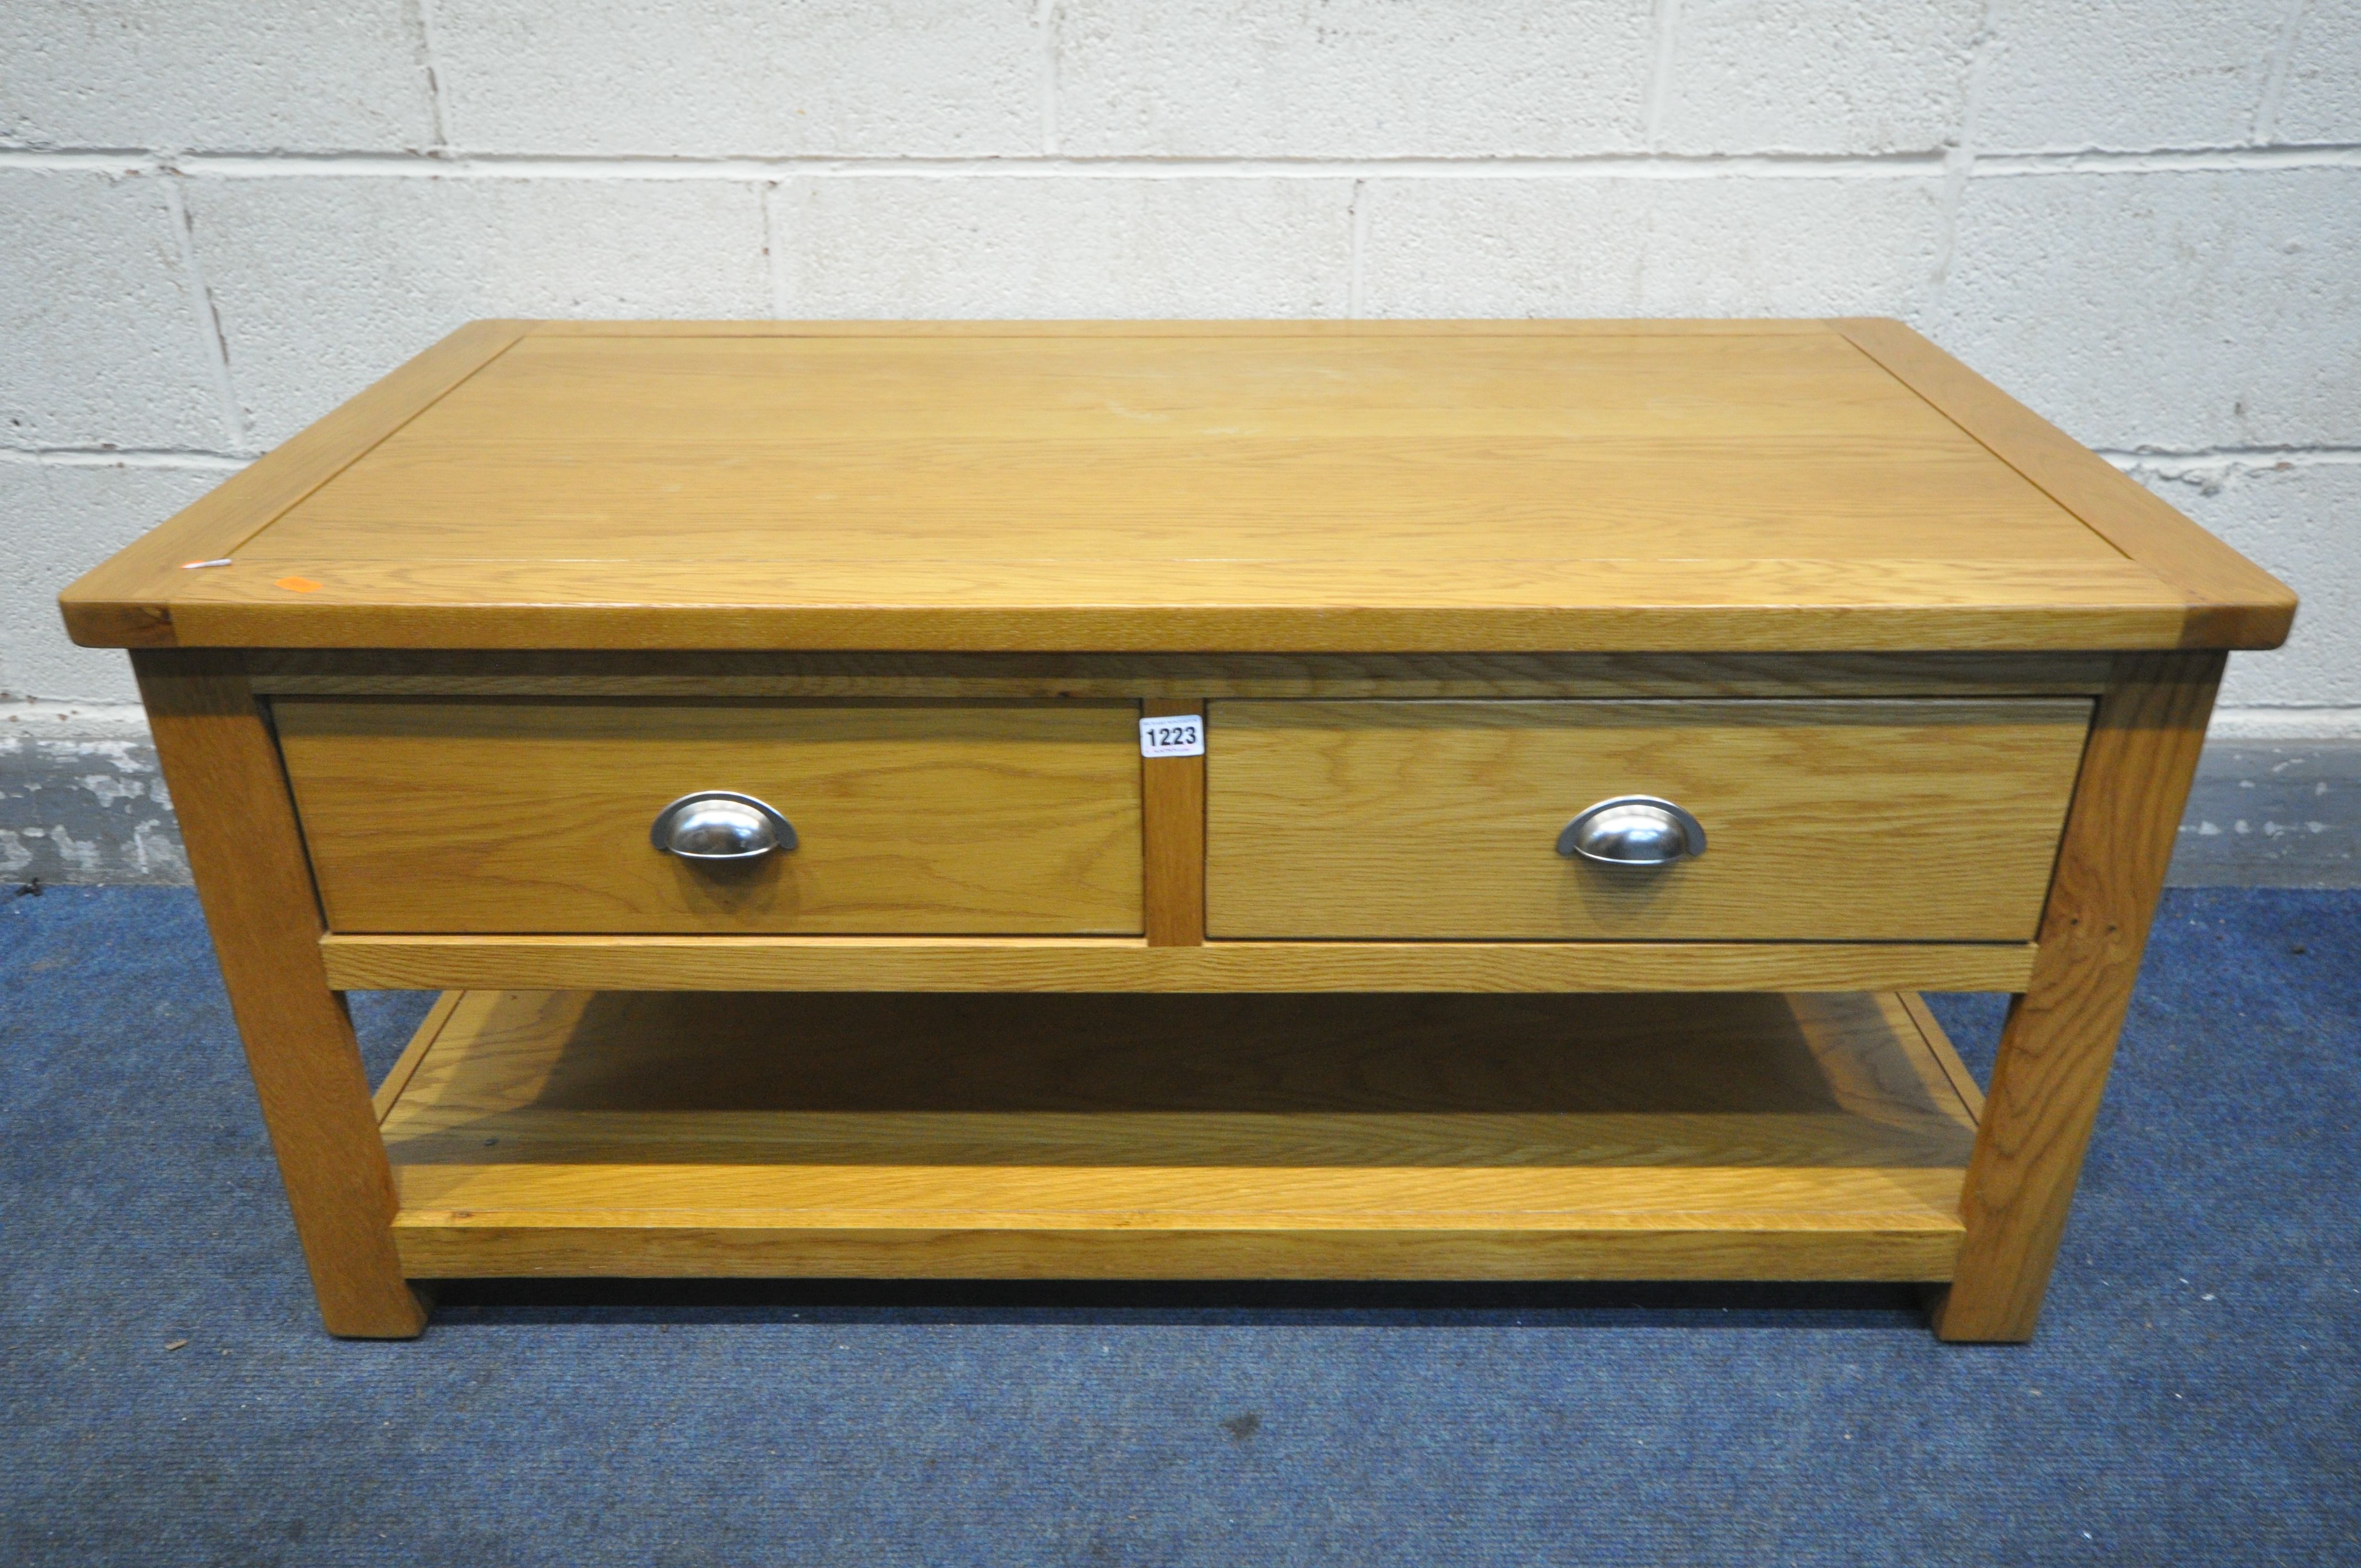 AN OAK COFFEE TABLE, with two drawers, and undershelf, length 110cm x depth 60cm x height 50cm (